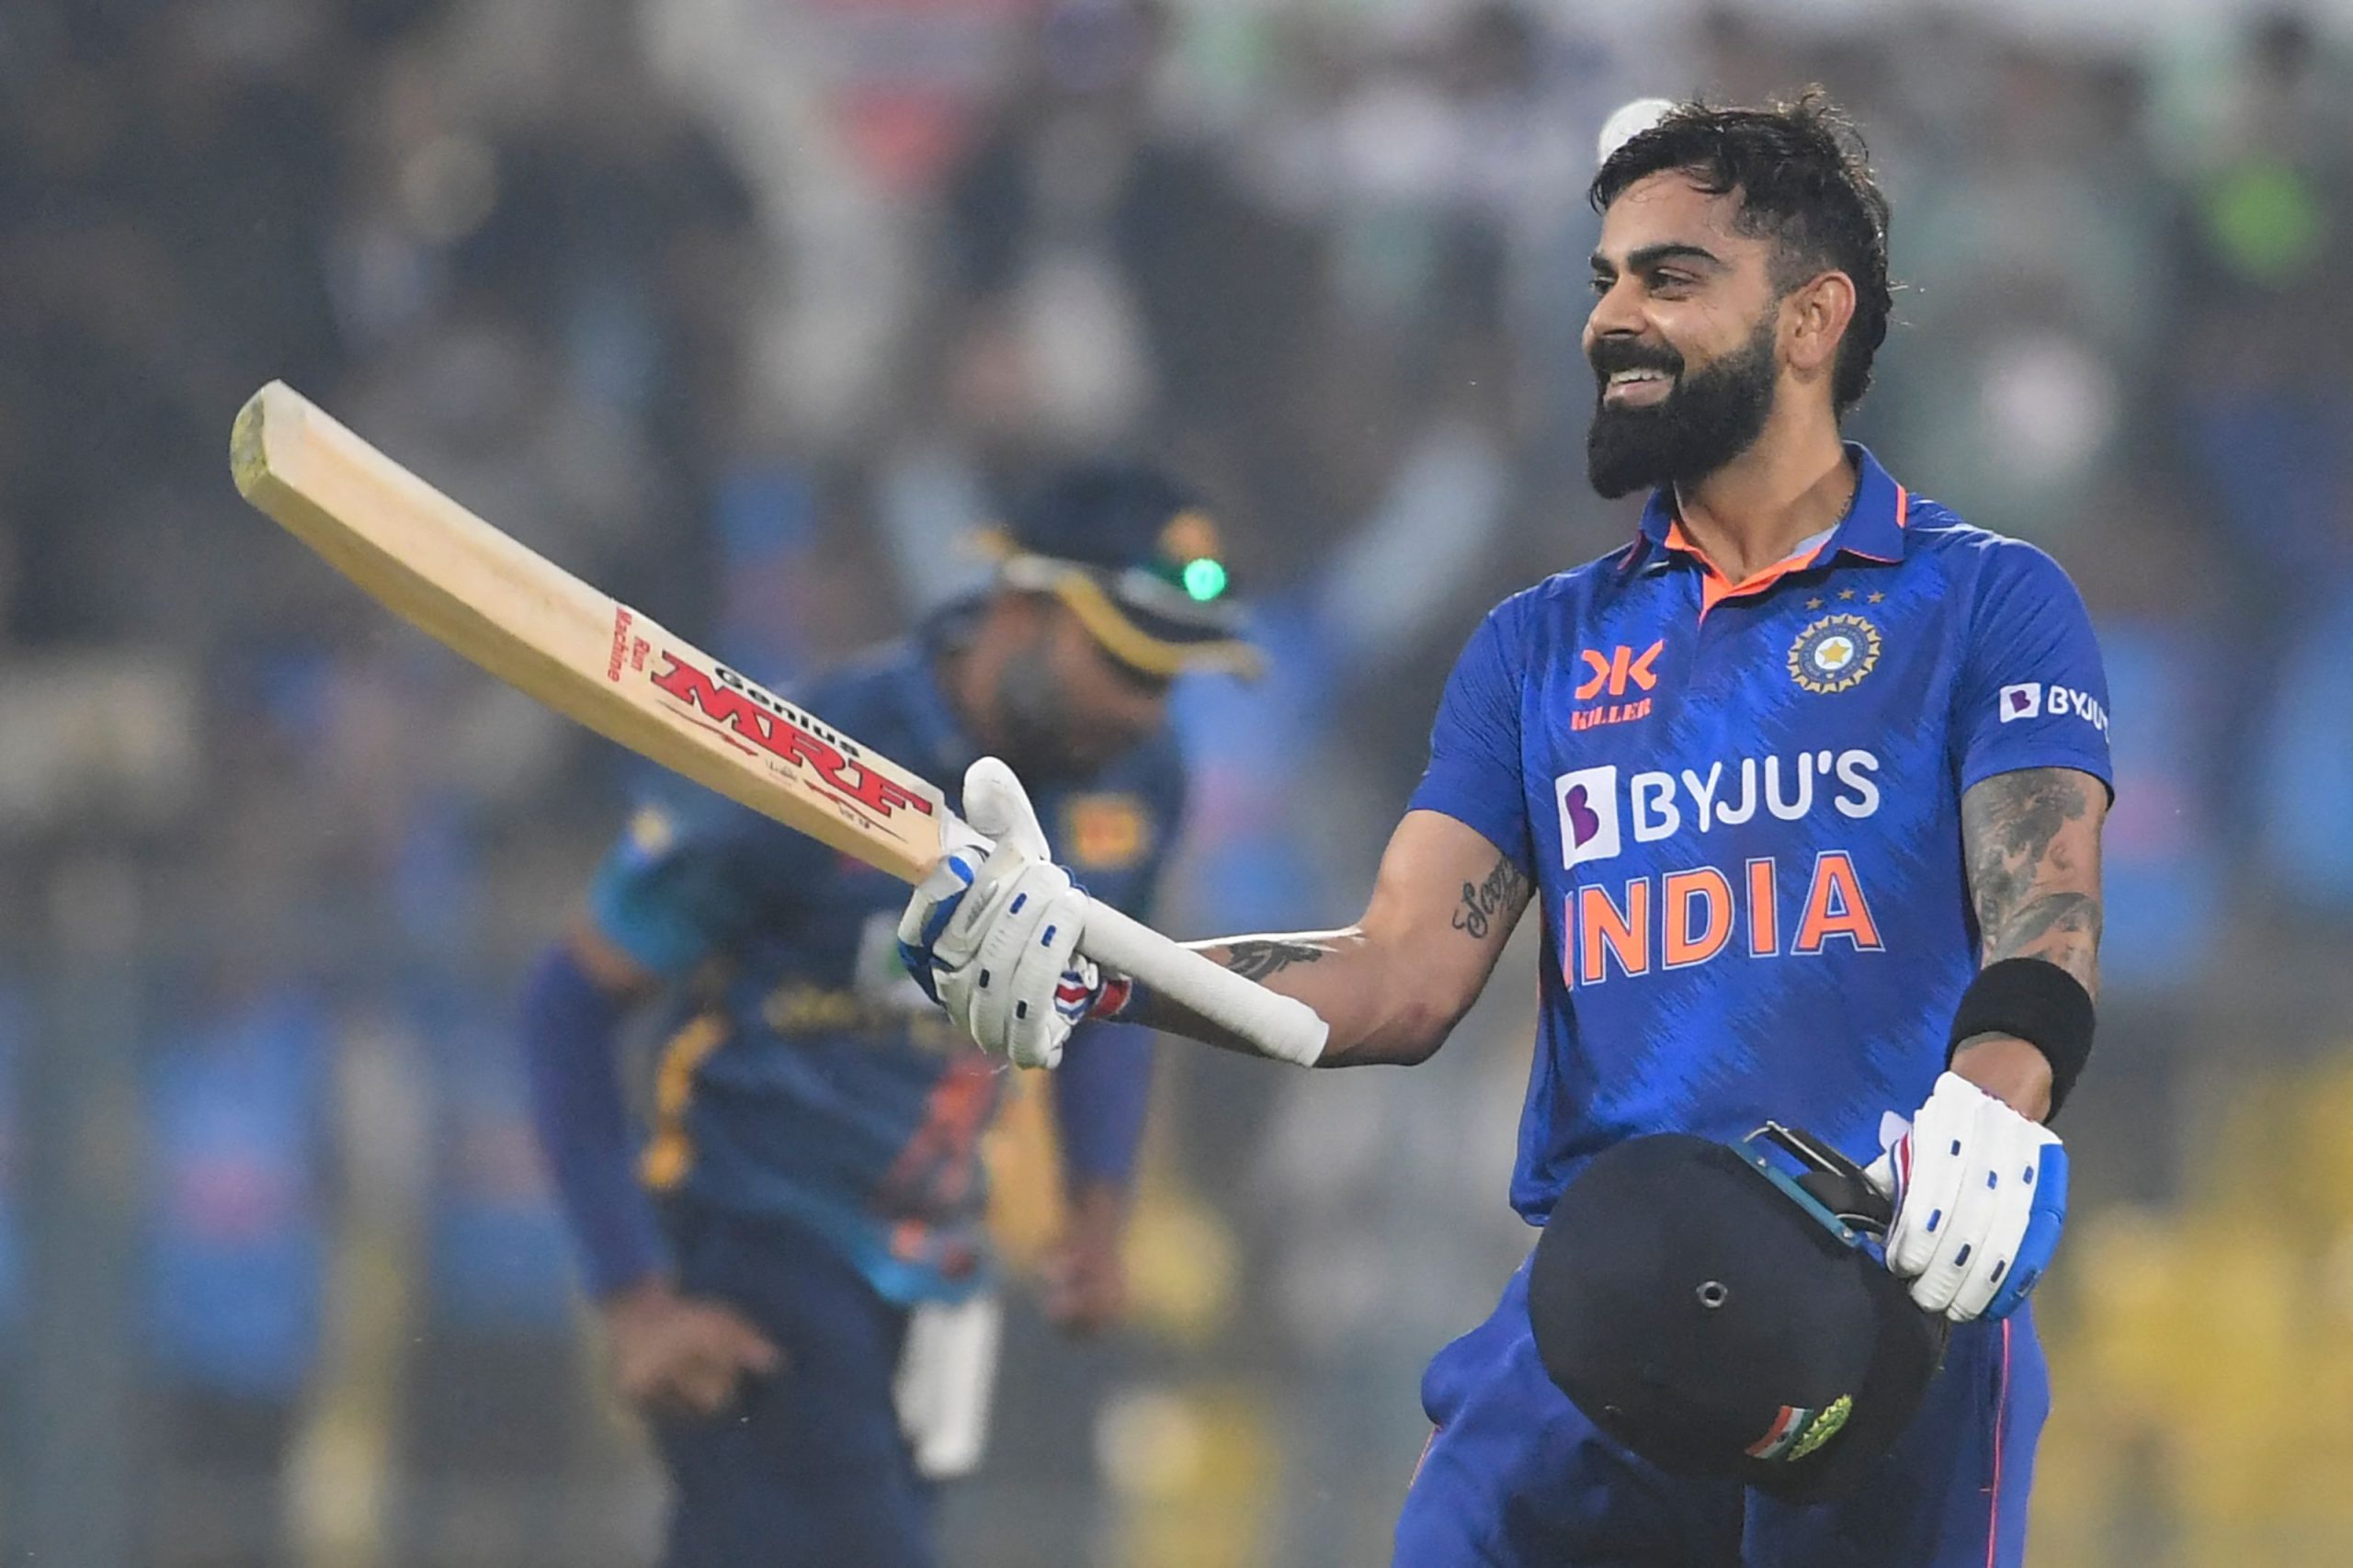 Kohli had smashed his 45th ODI century and 73rd in international cricket